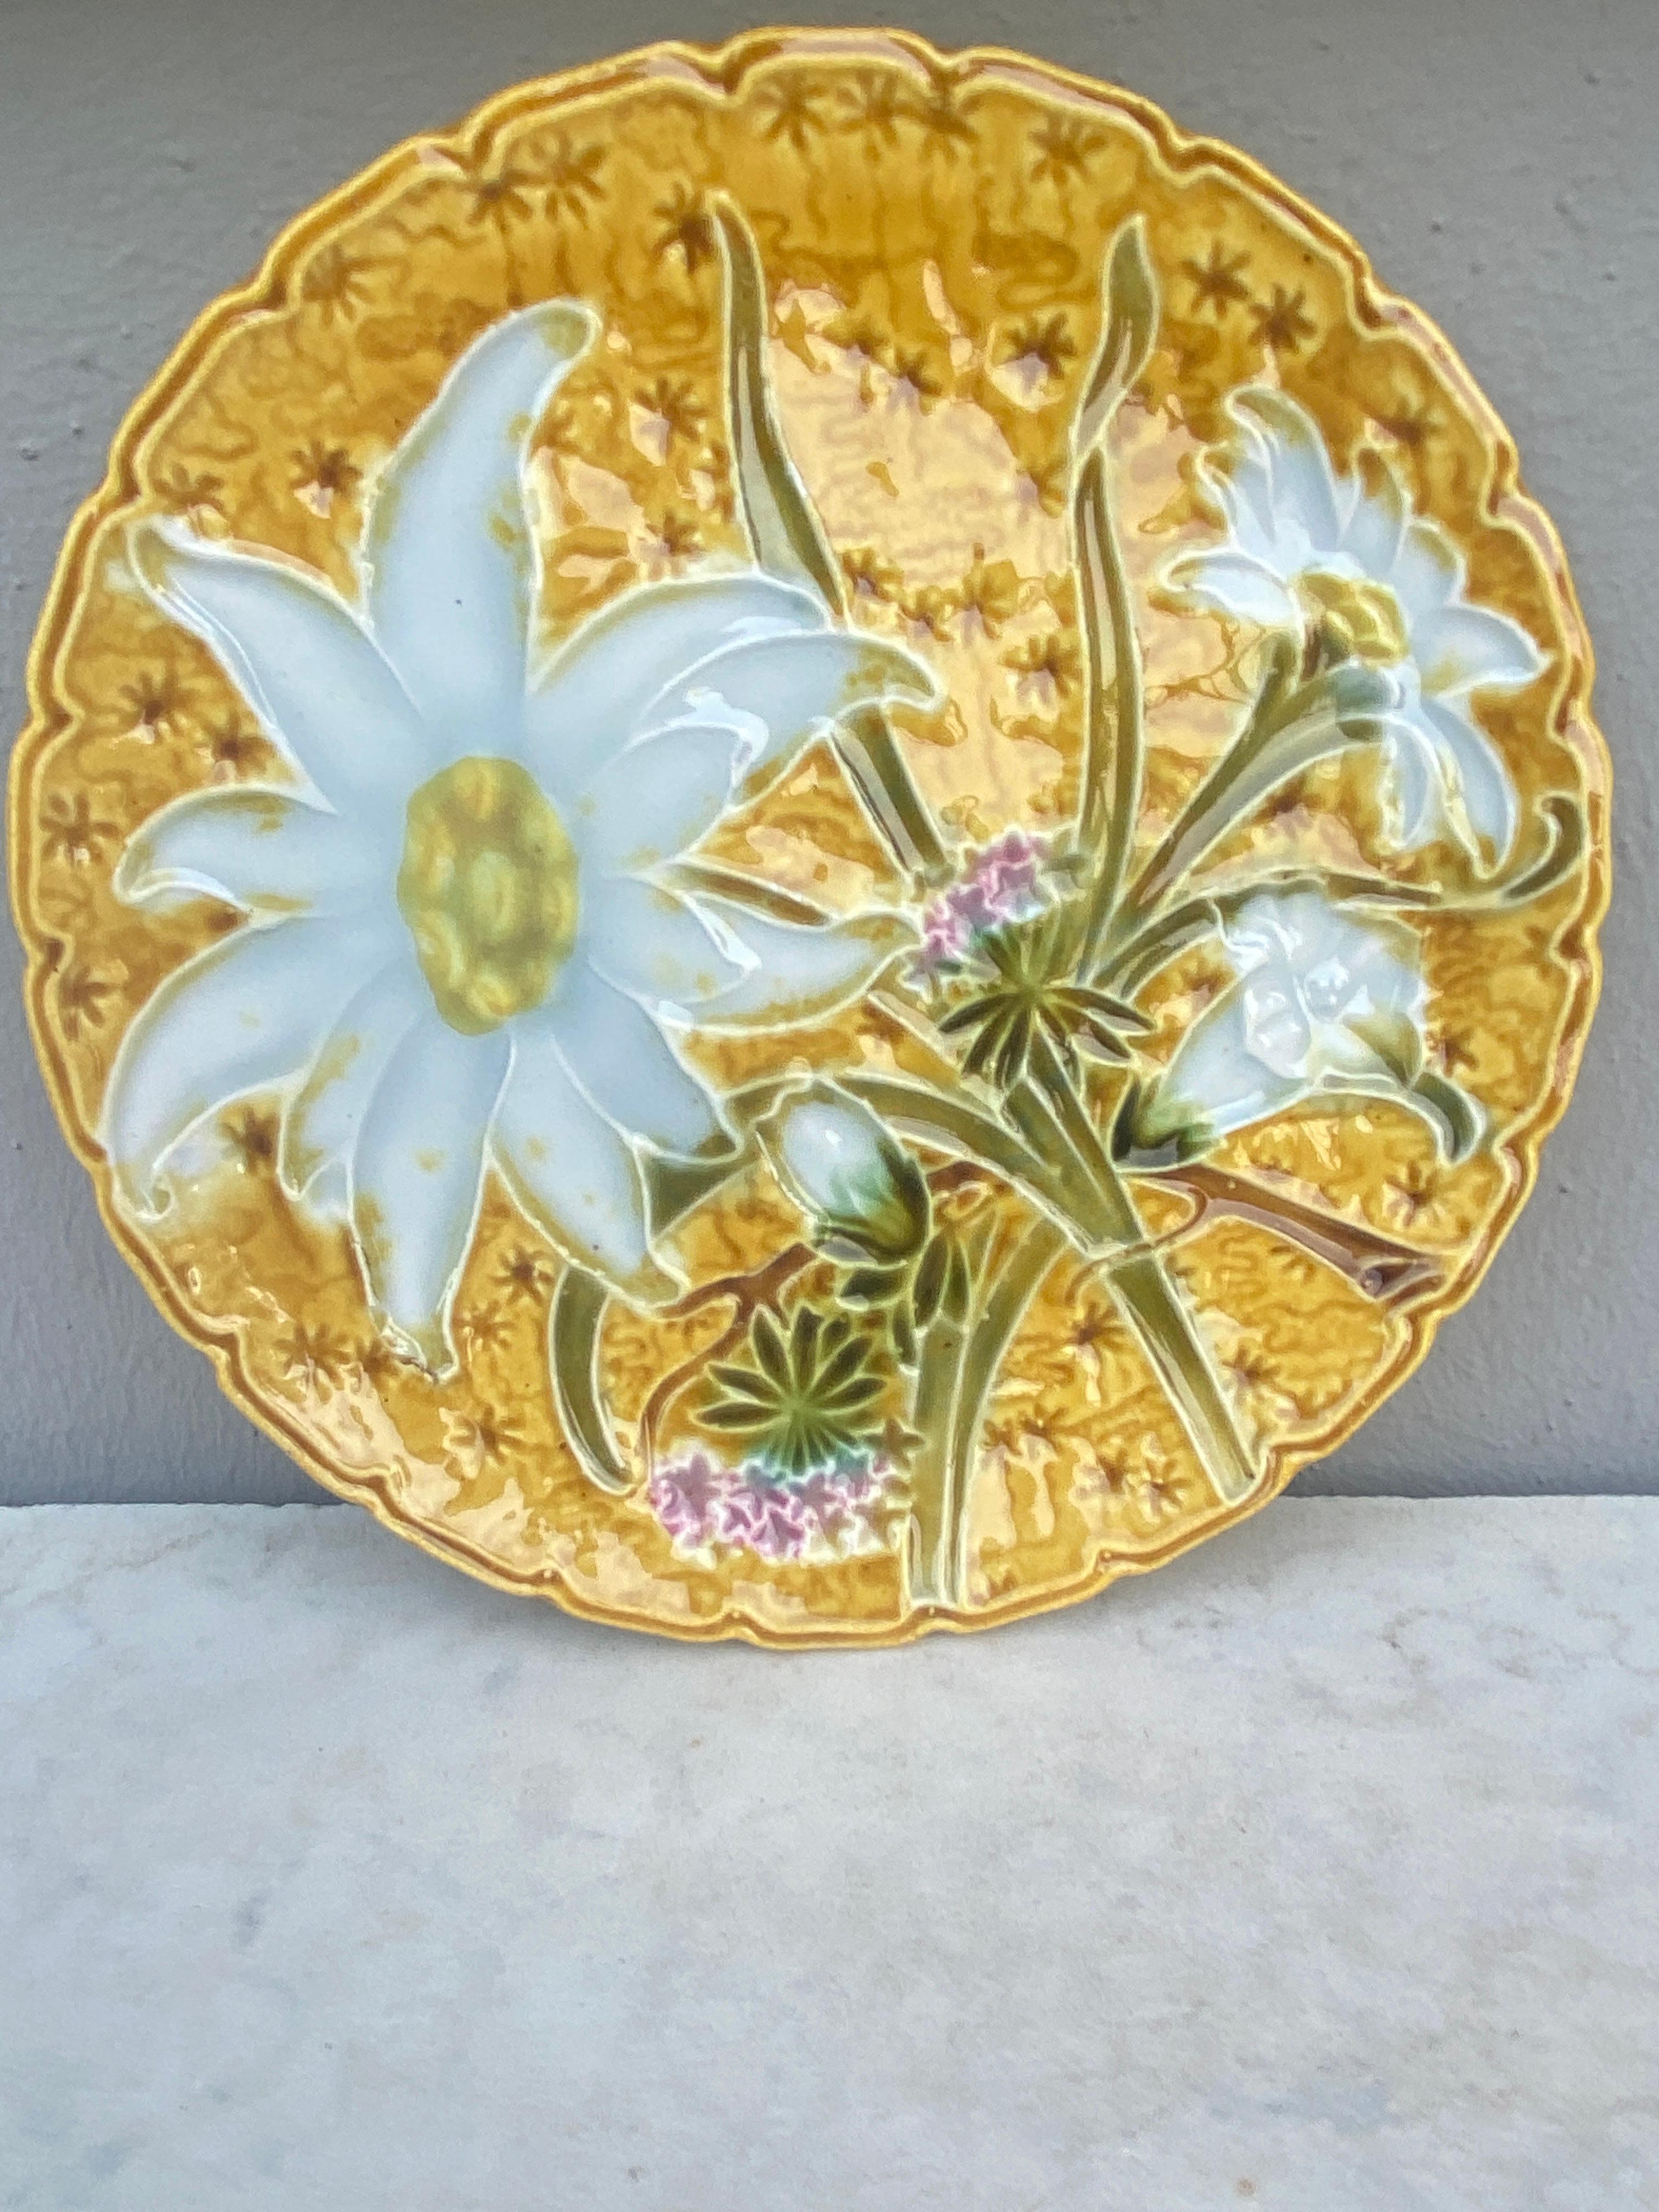 Rustic Majolica White Flowers Villeroy & Boch, circa 1900 For Sale